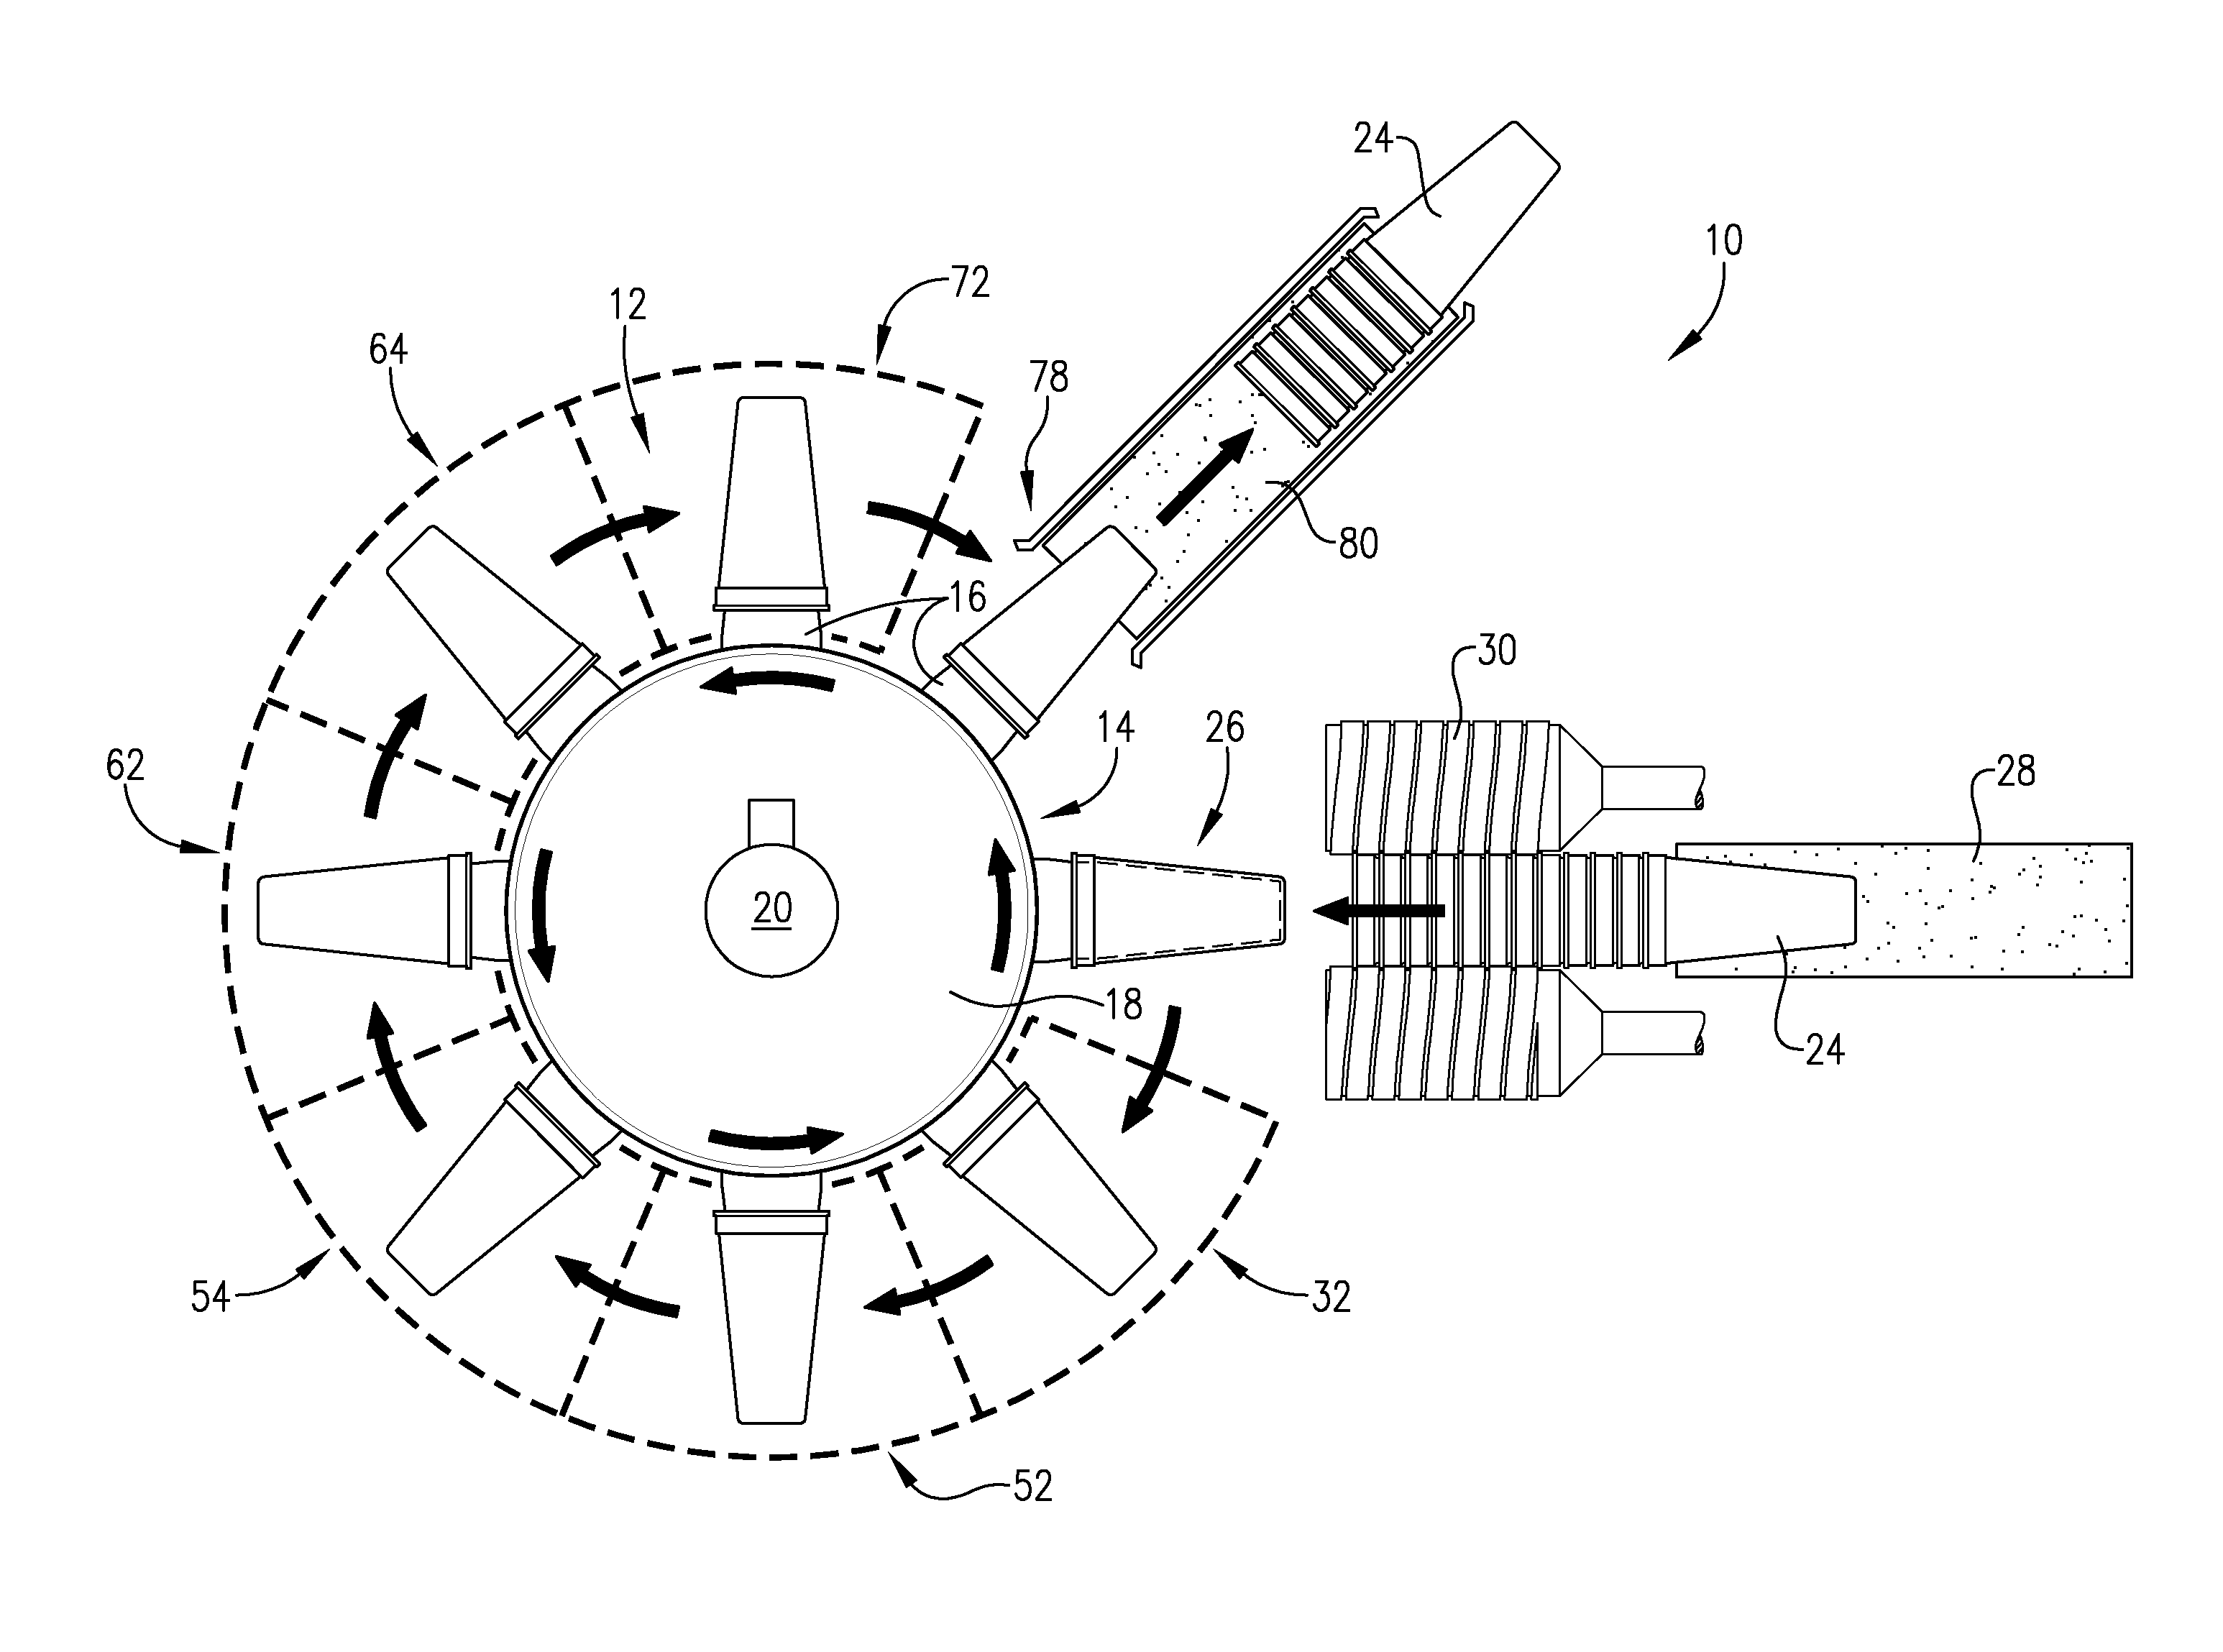 Apparatus and method for de-inking printed surfaces